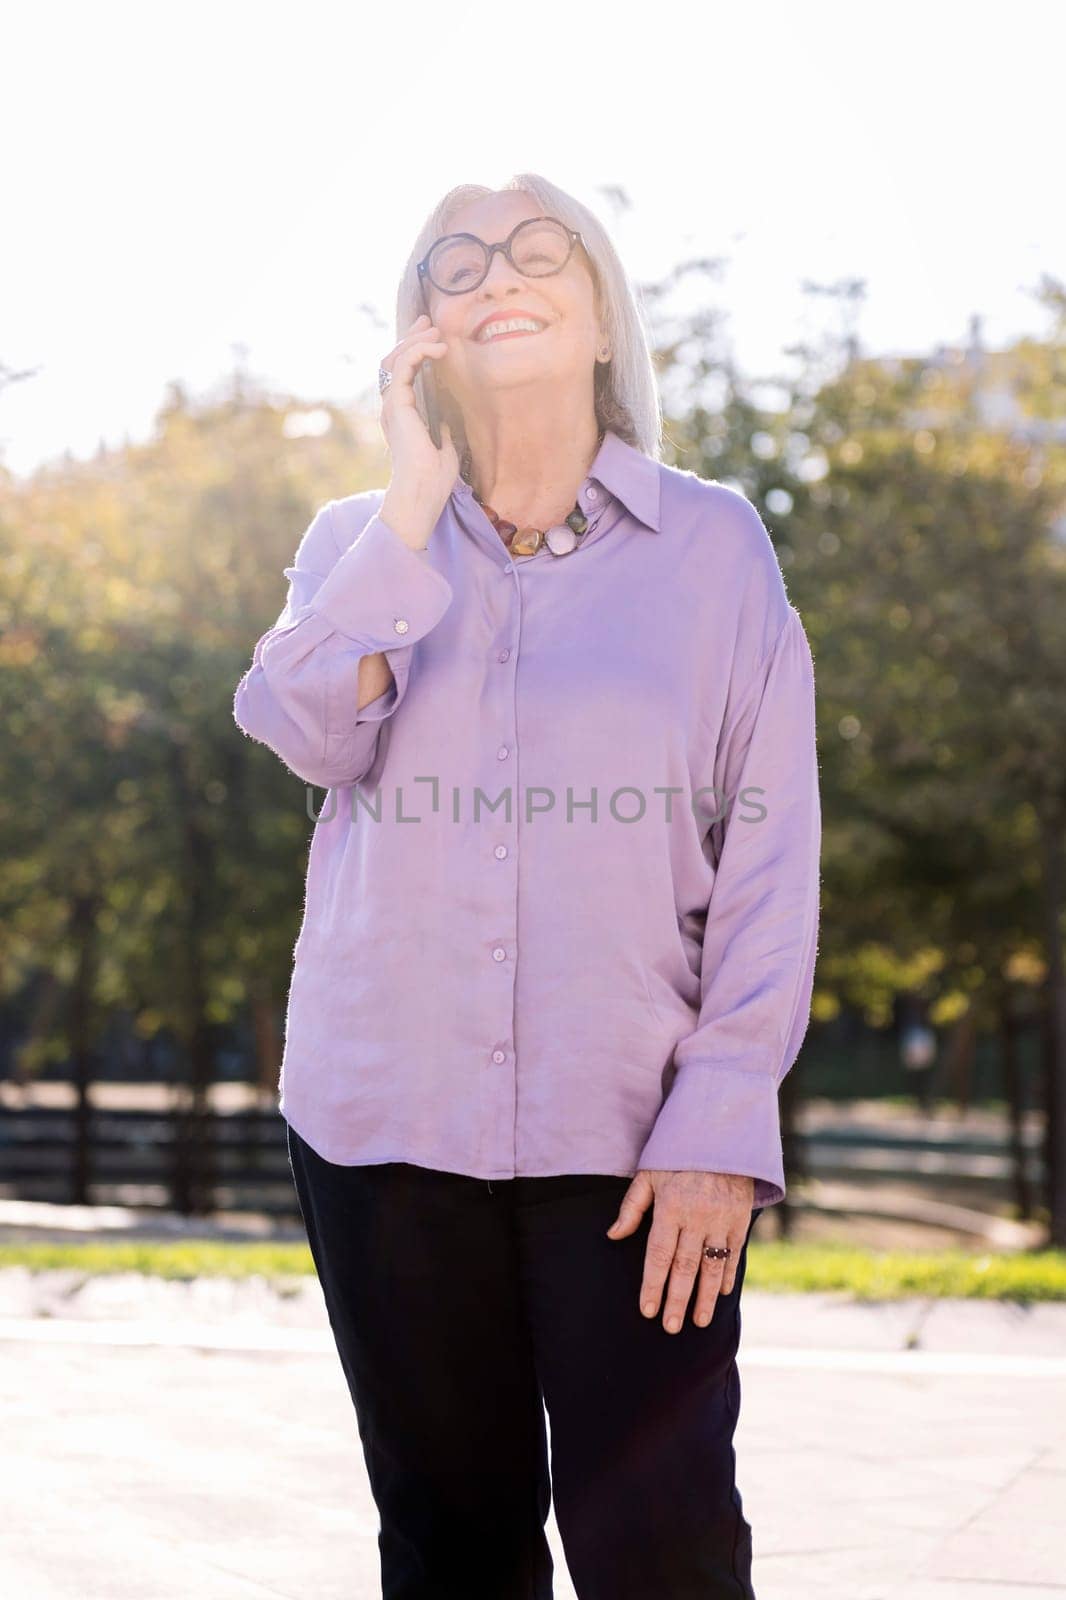 senior woman smiling happy talking by mobile phone by raulmelldo